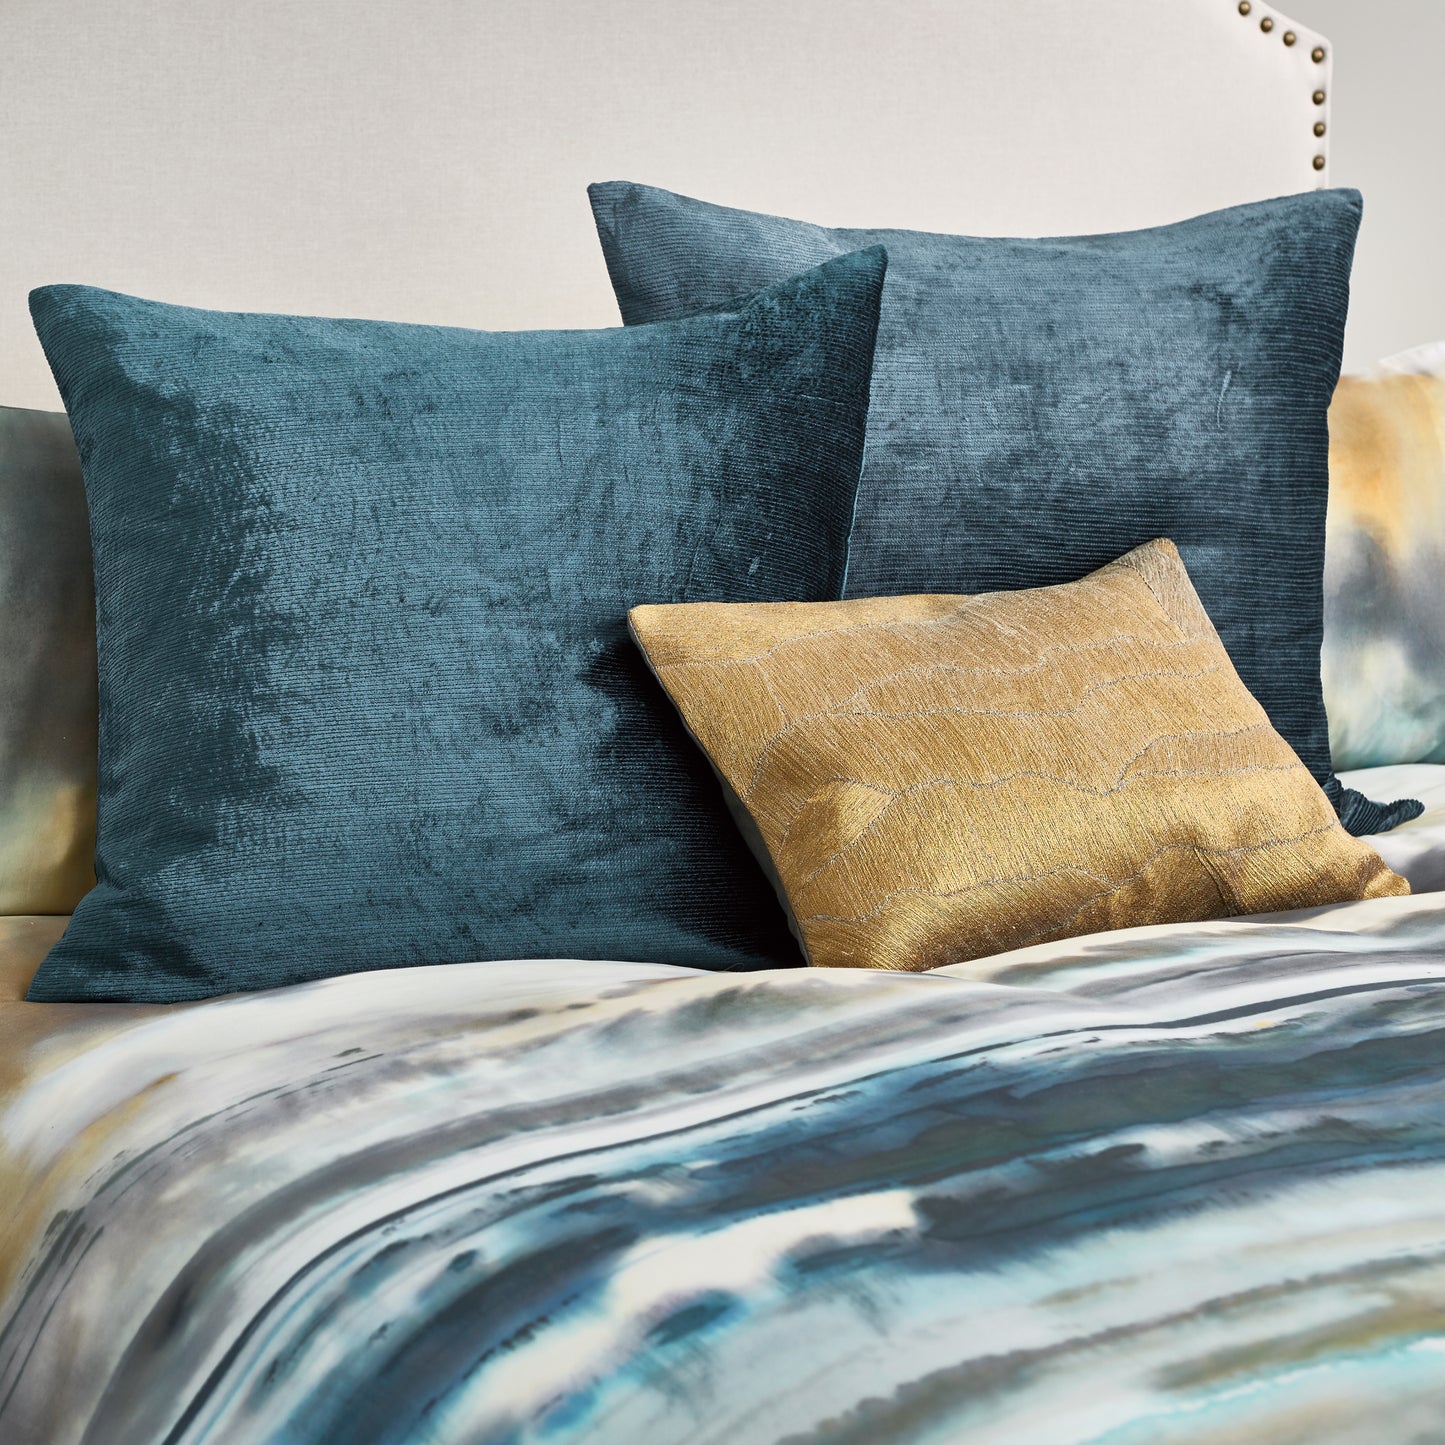 Michael Aram After The Storm Bedding Collection